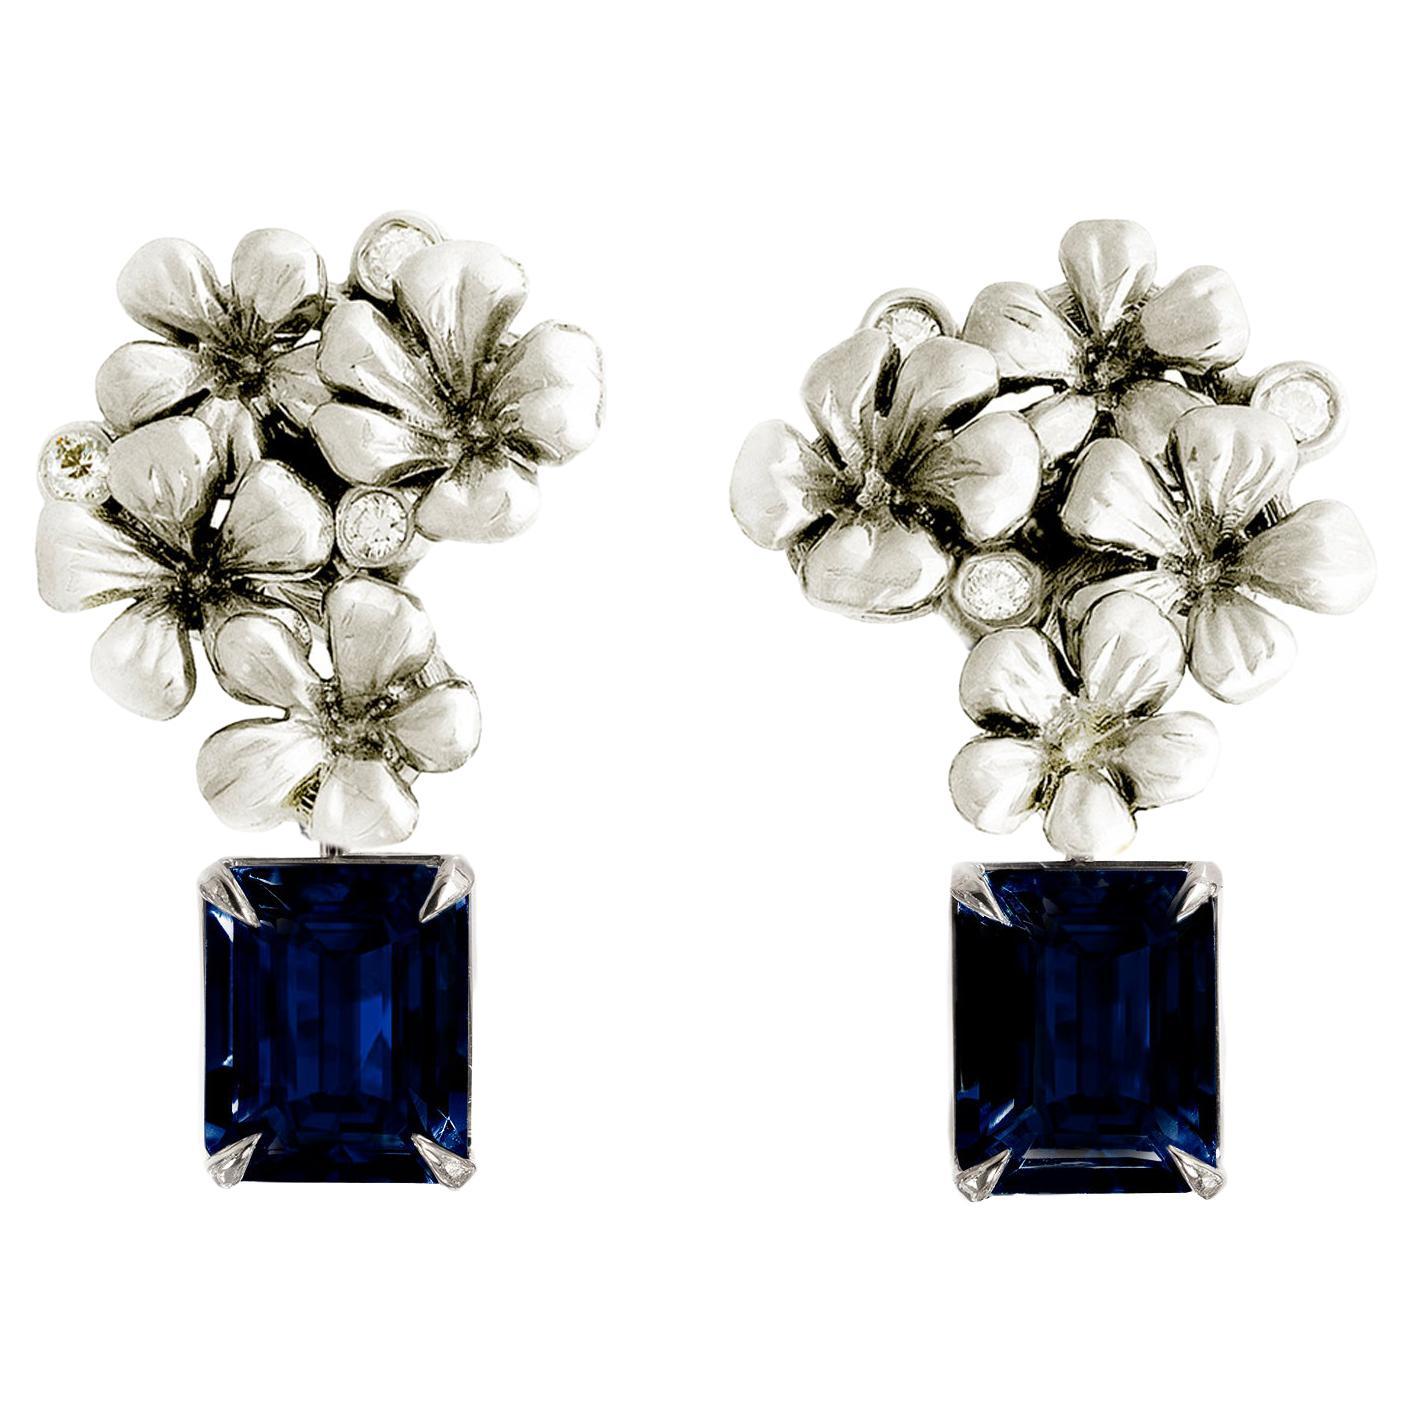 Contemporary Stud Earrings in Eighteen Karat White Gold with Natural Sapphires